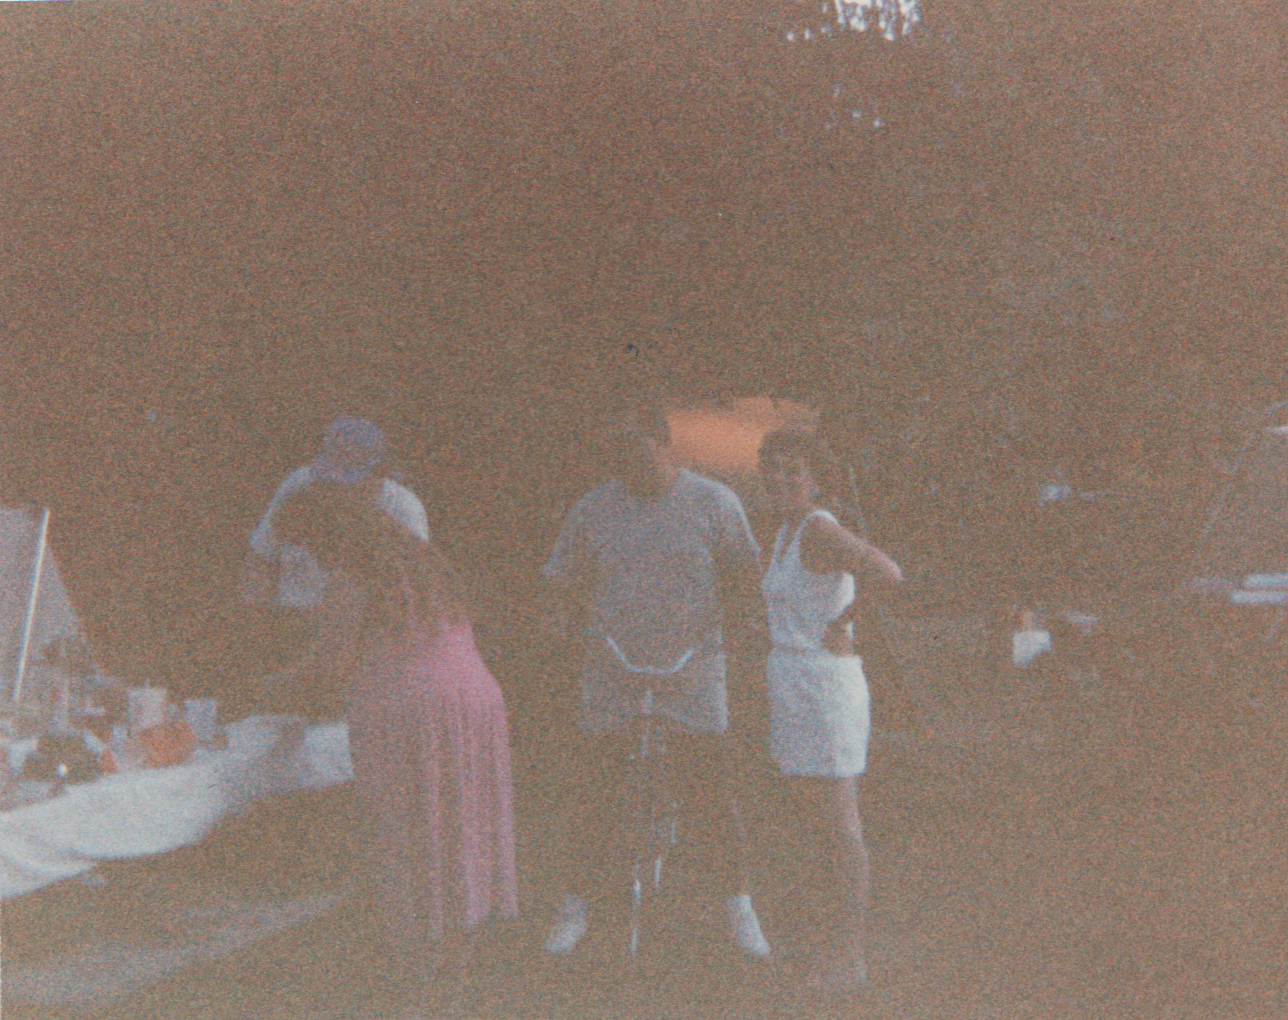 1991-08 - Camping - Joey, Rick, Crystal, Katie, mom, dad, others, tent, picnic table, field, food, playing, includes maybe Sunday or weekend-5.png